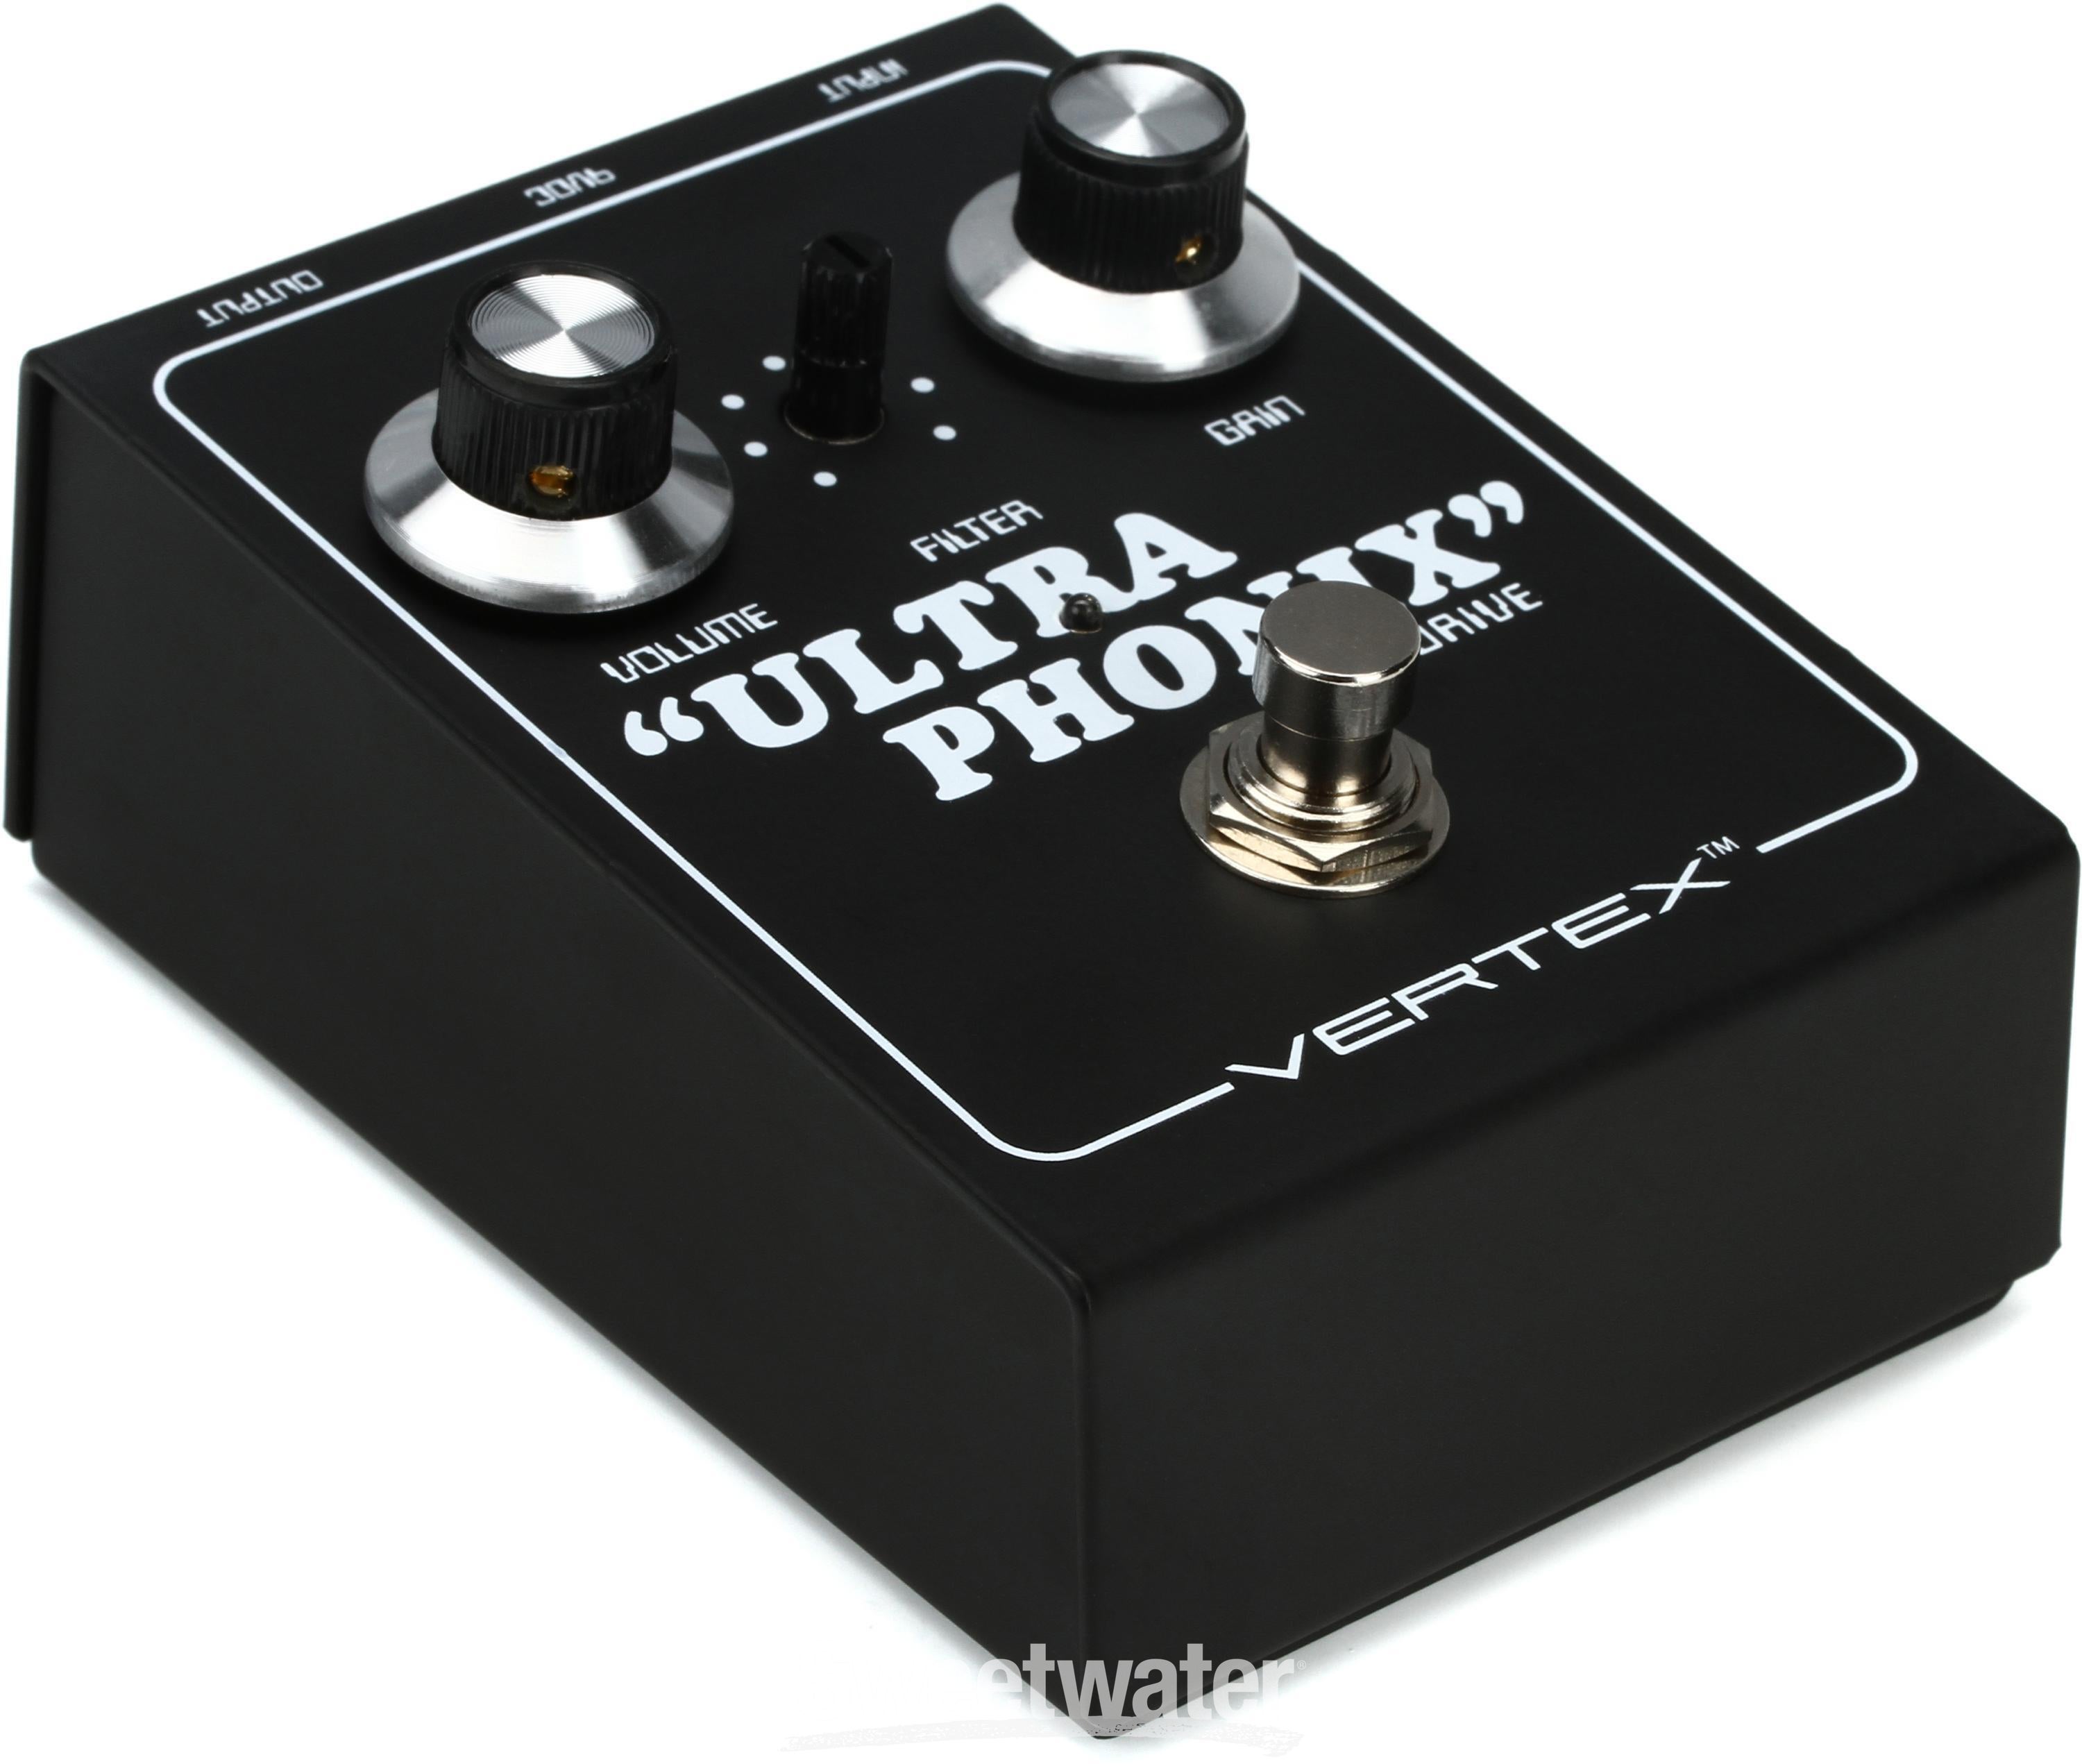 Vertex Effects Ultraphonix Overdrive Pedal Reviews | Sweetwater